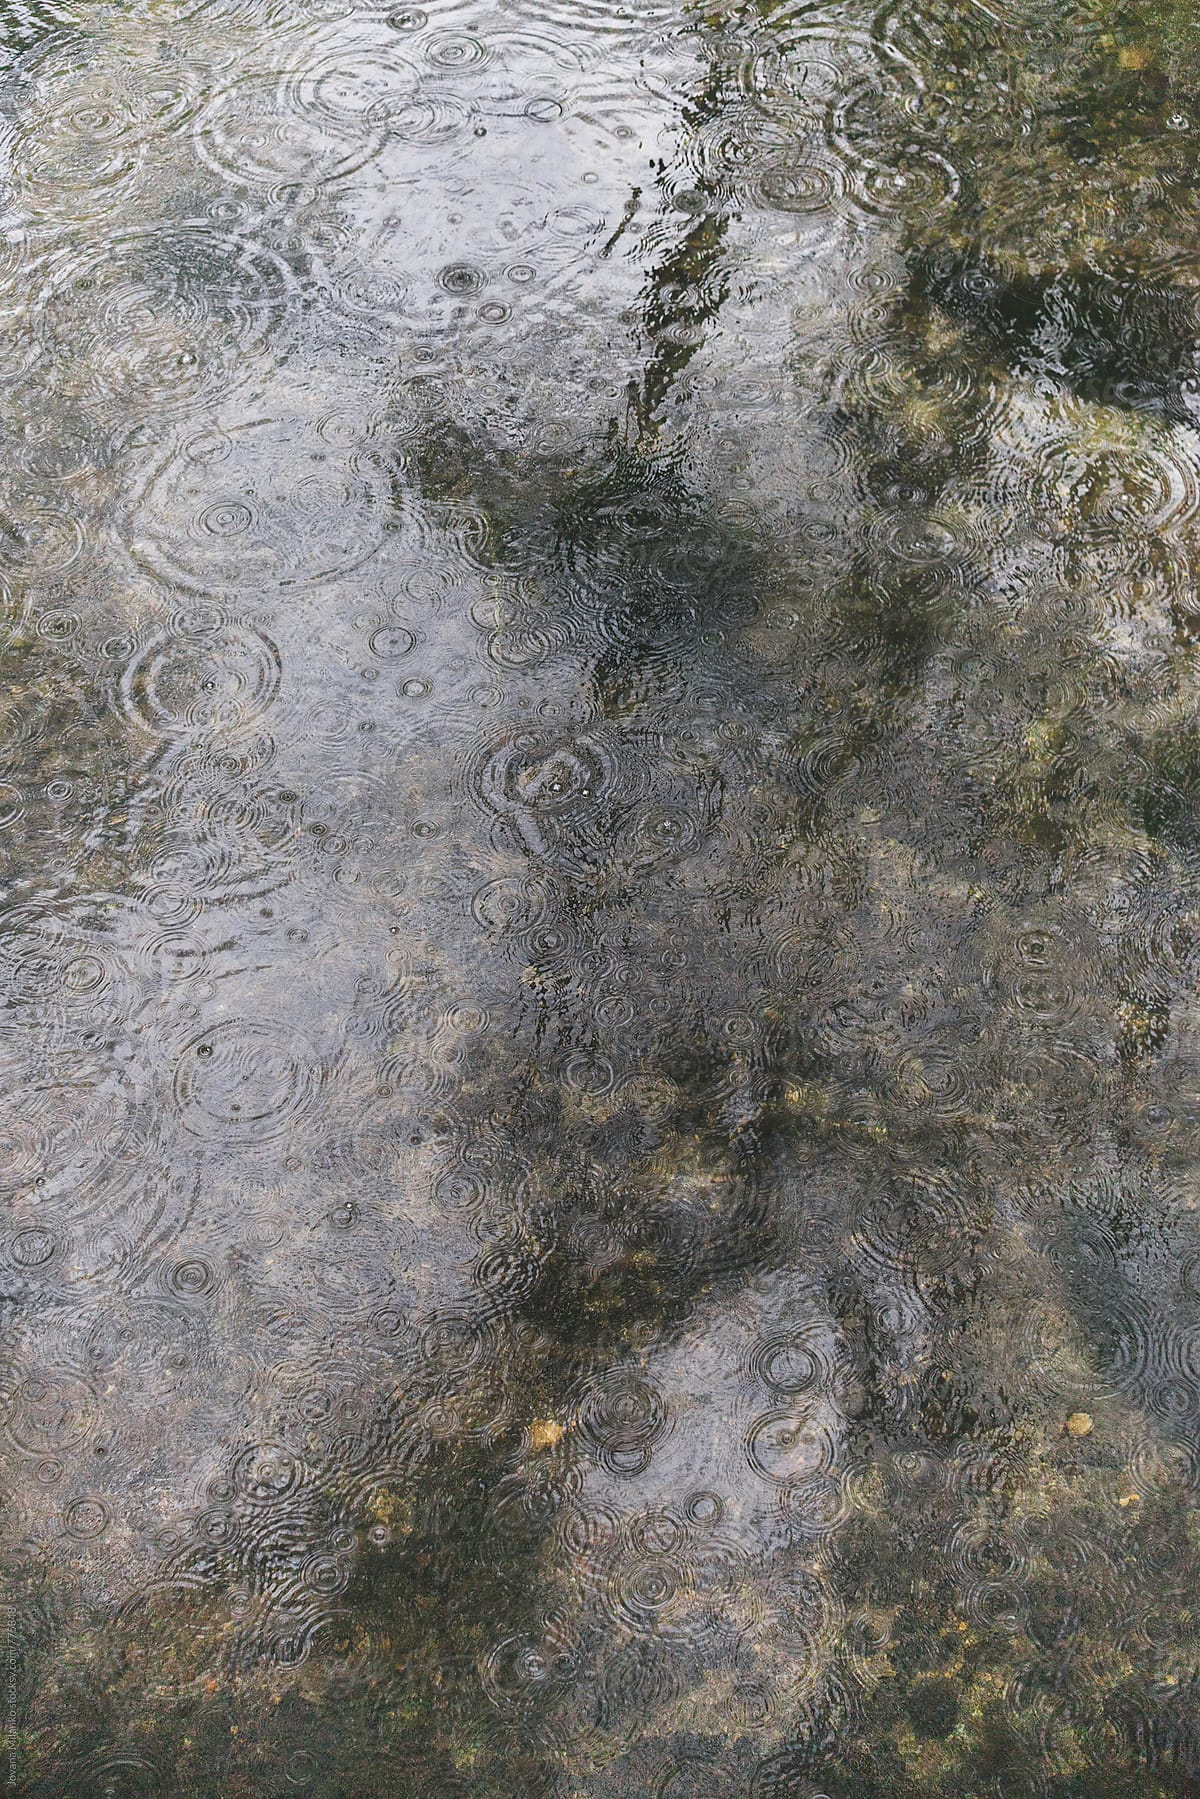 Raindrops Falling on the Puddle Water Surface